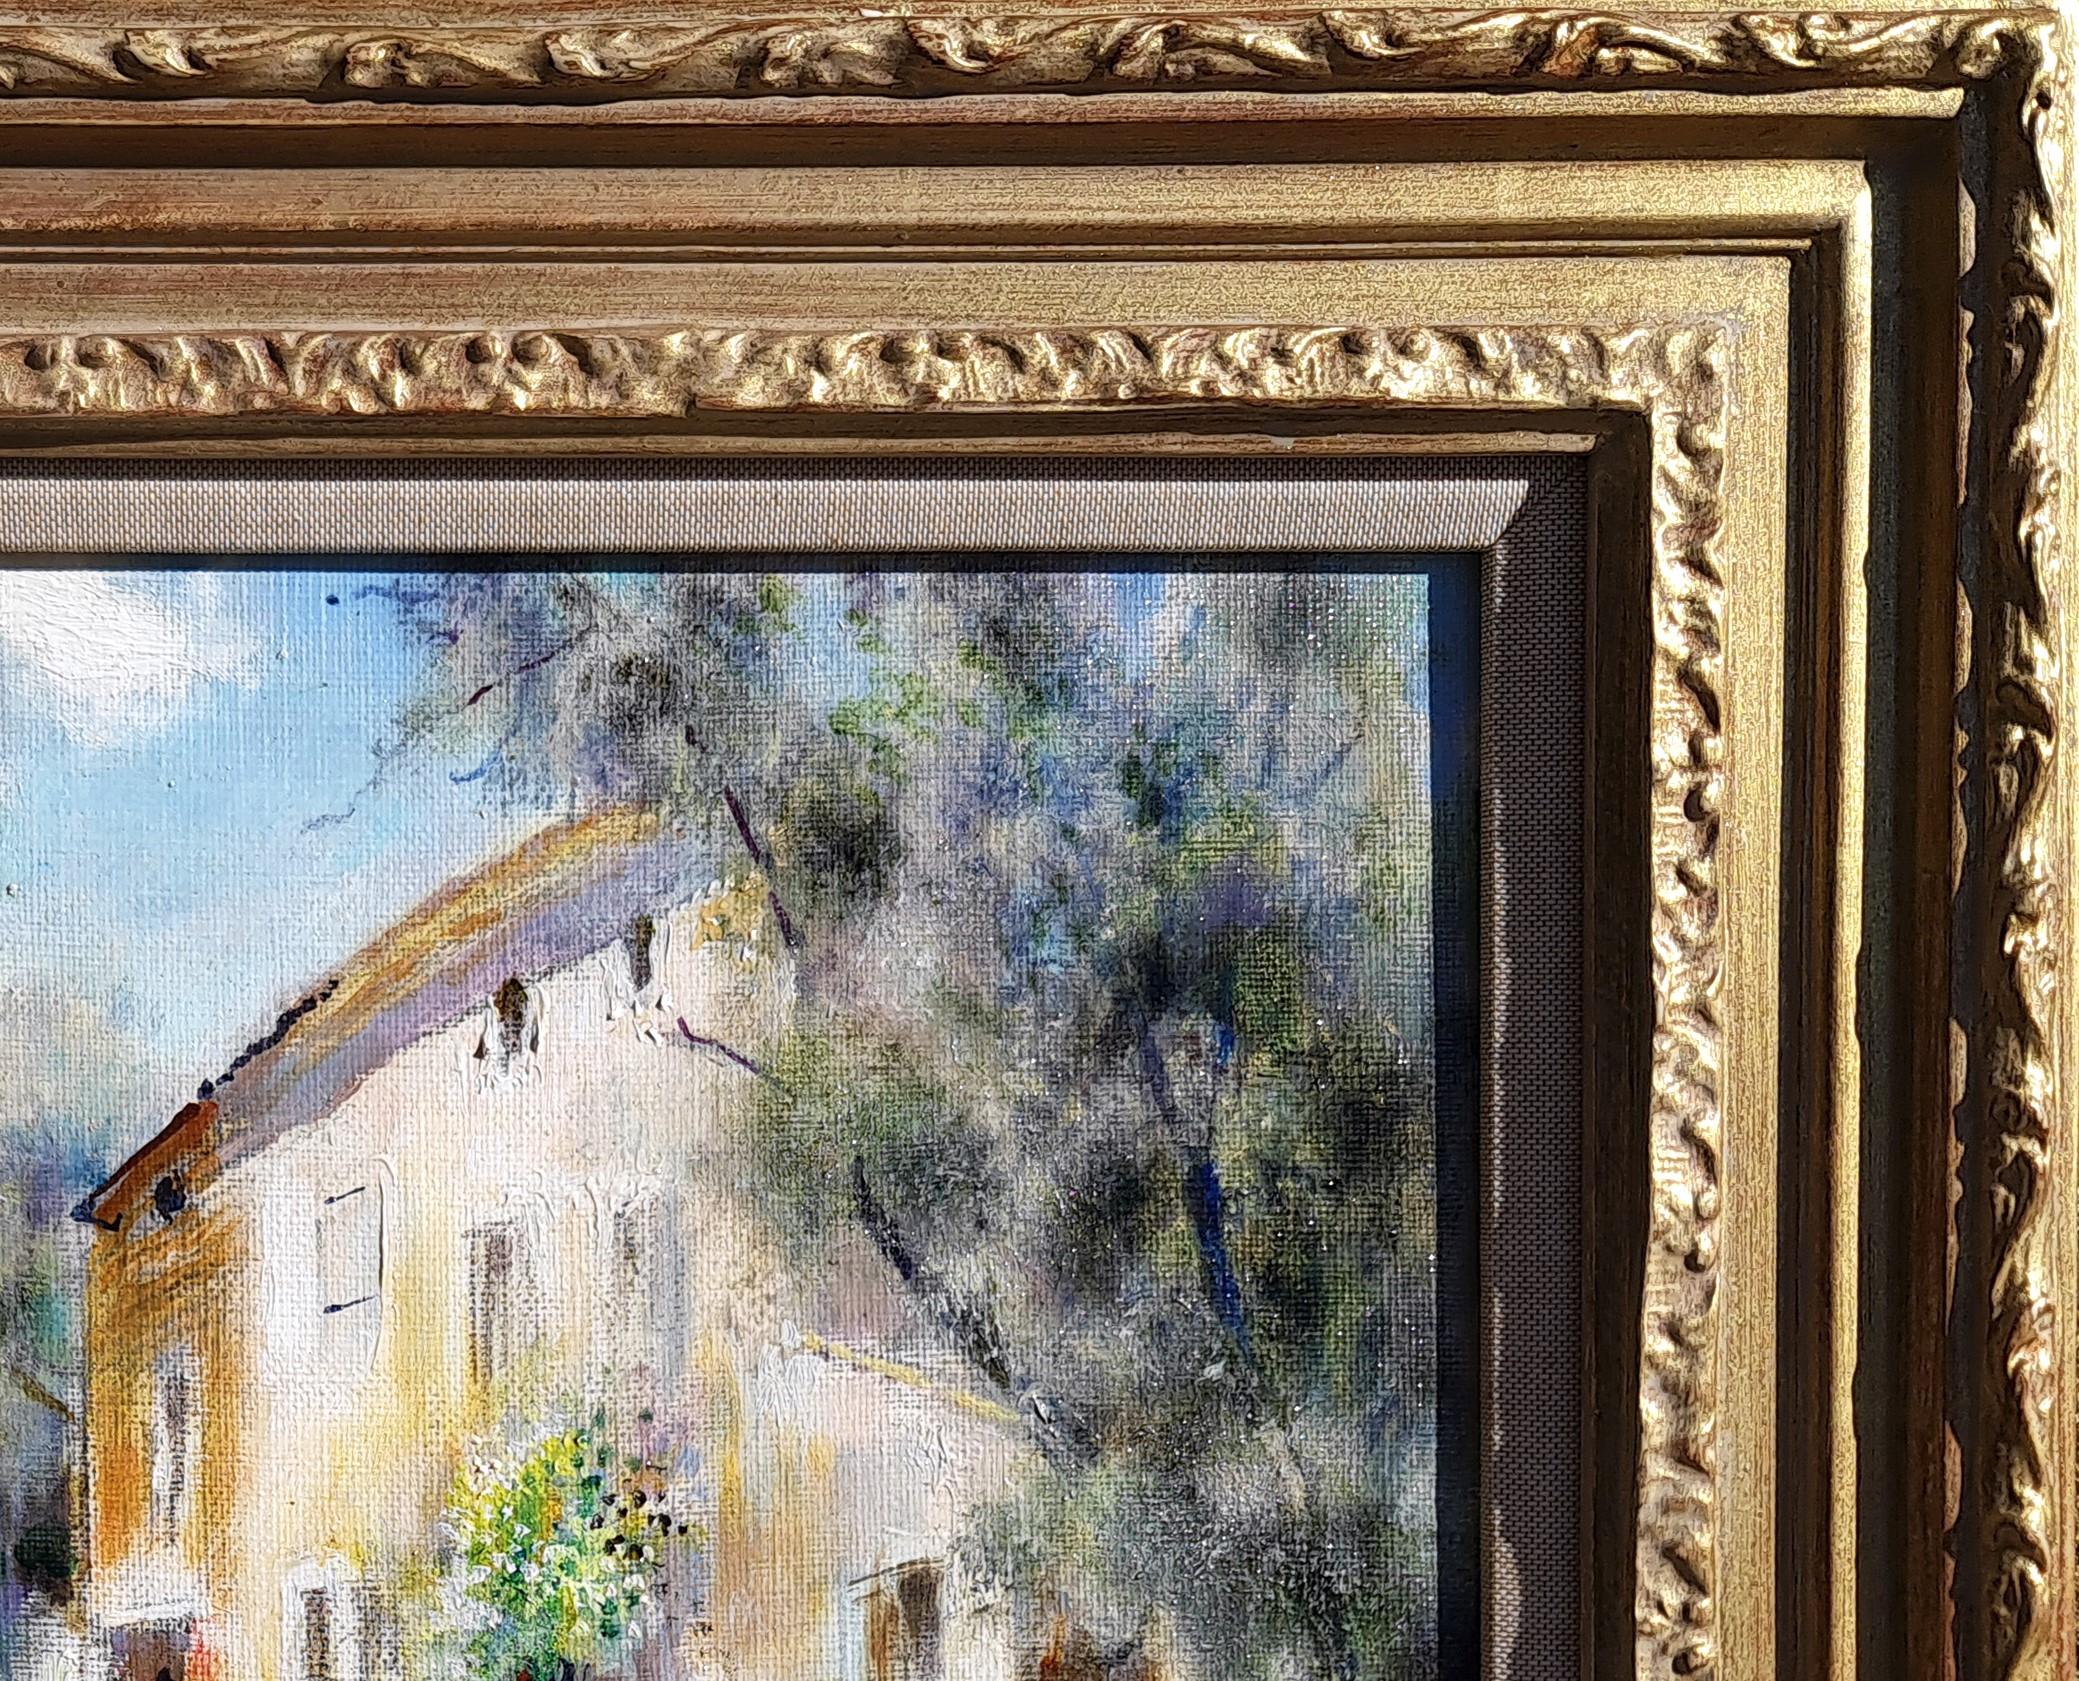 Morninh Shadows, Provence - Impressionist Painting by Gabriel Deschamps